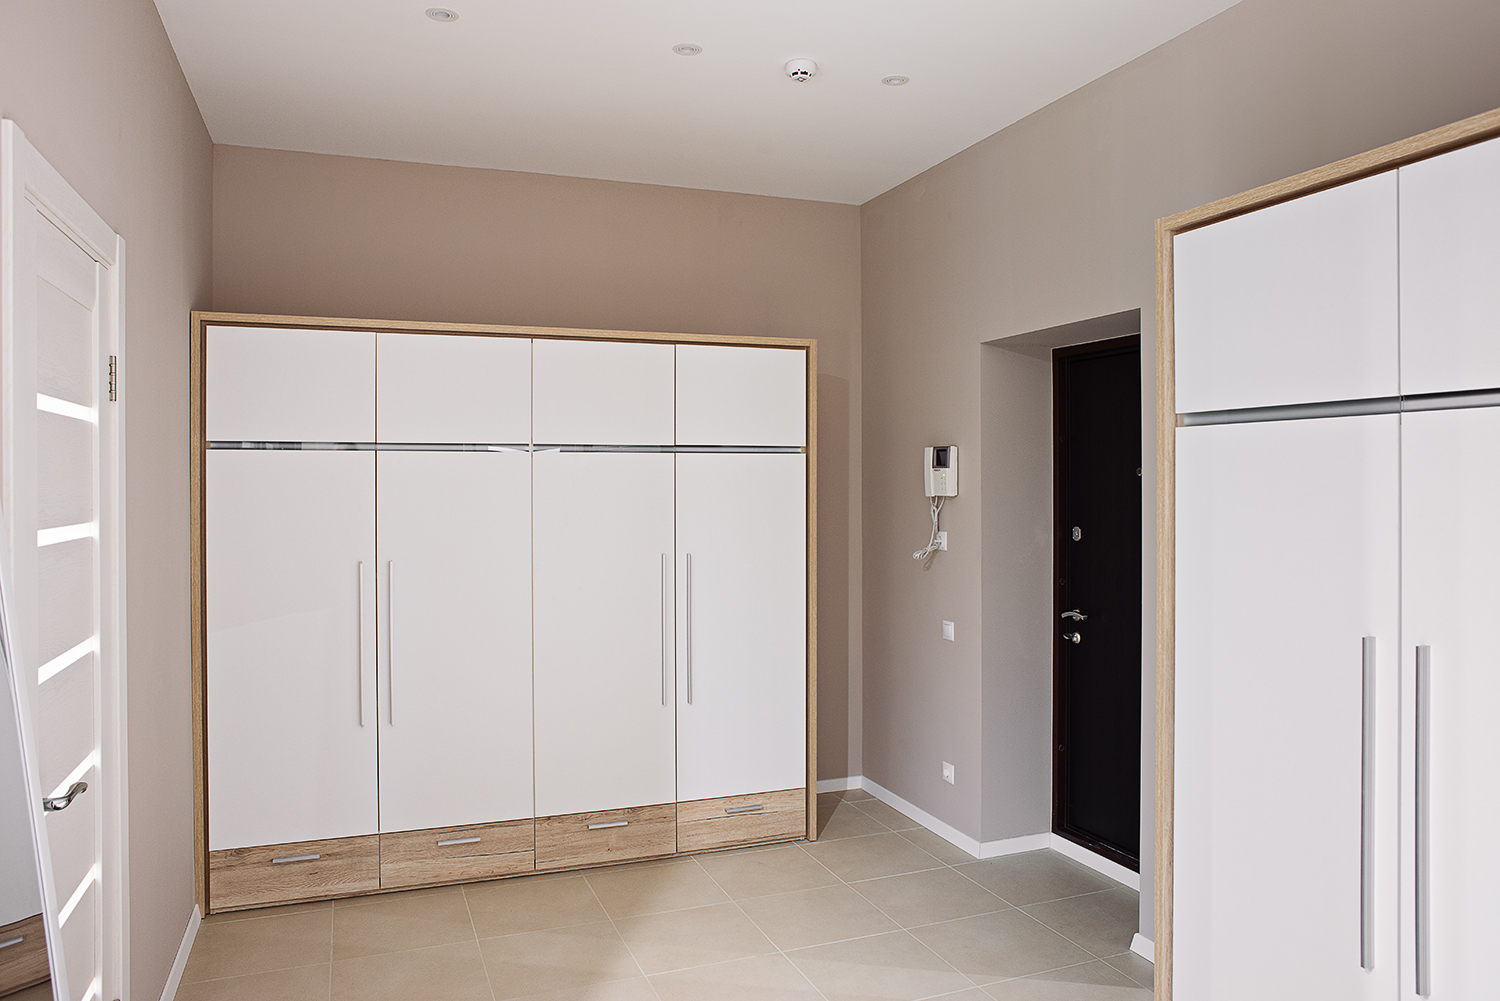 White wardrobe in the design of the apartment